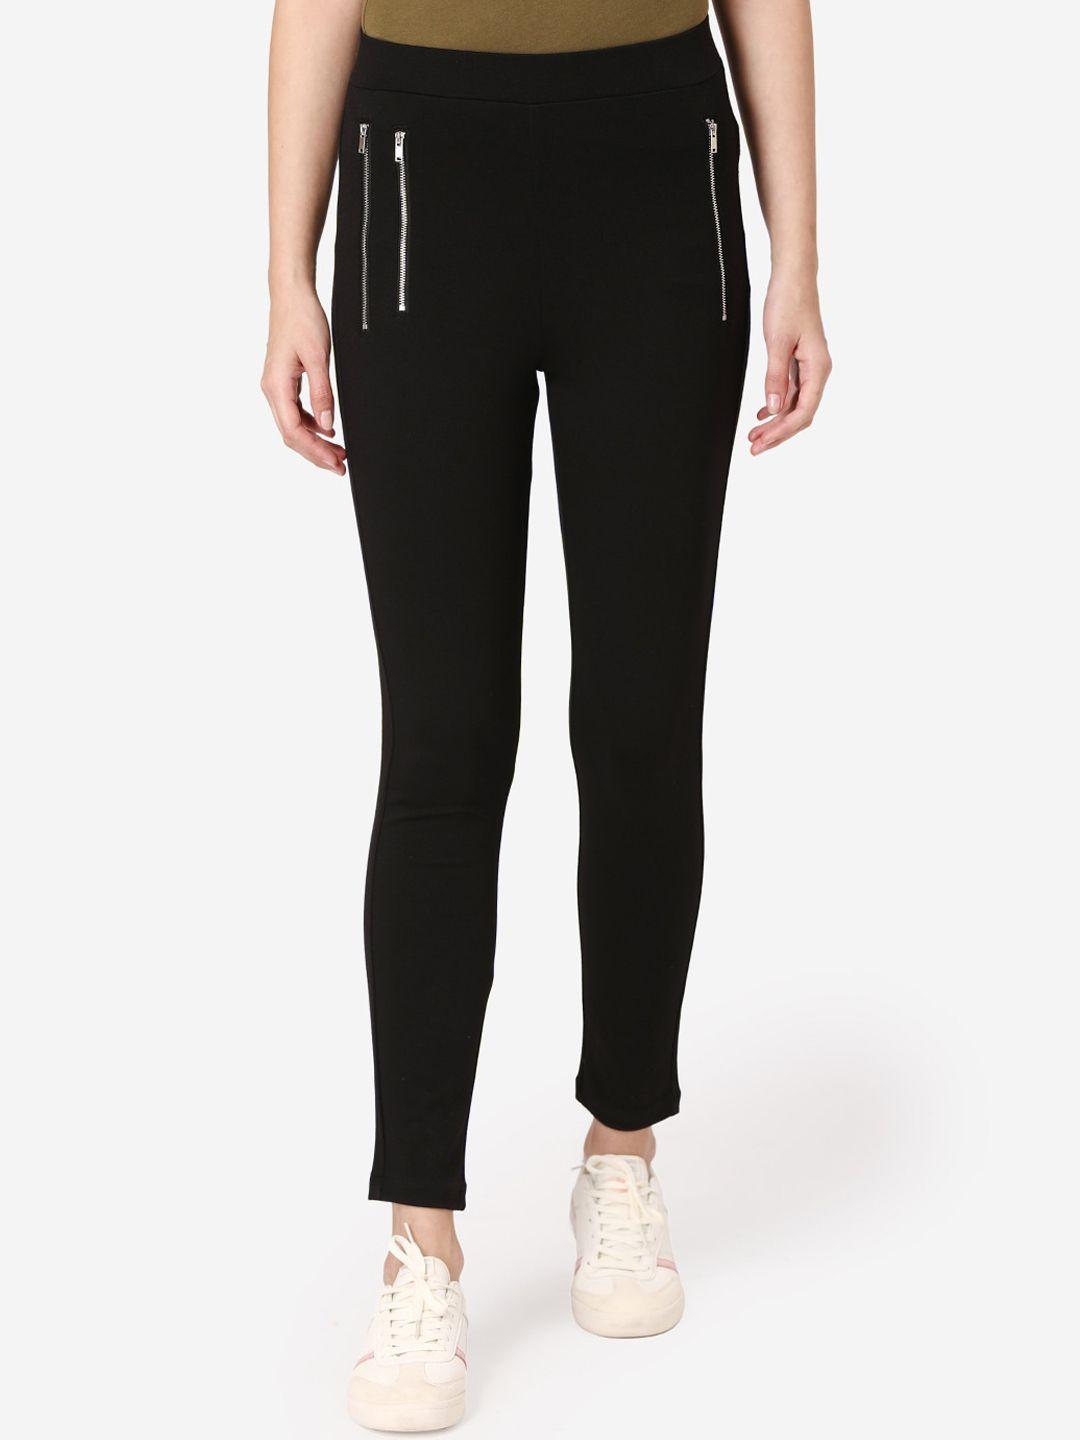 mode-by-red-tape-women-black-solid-relaxed-fit-treggings